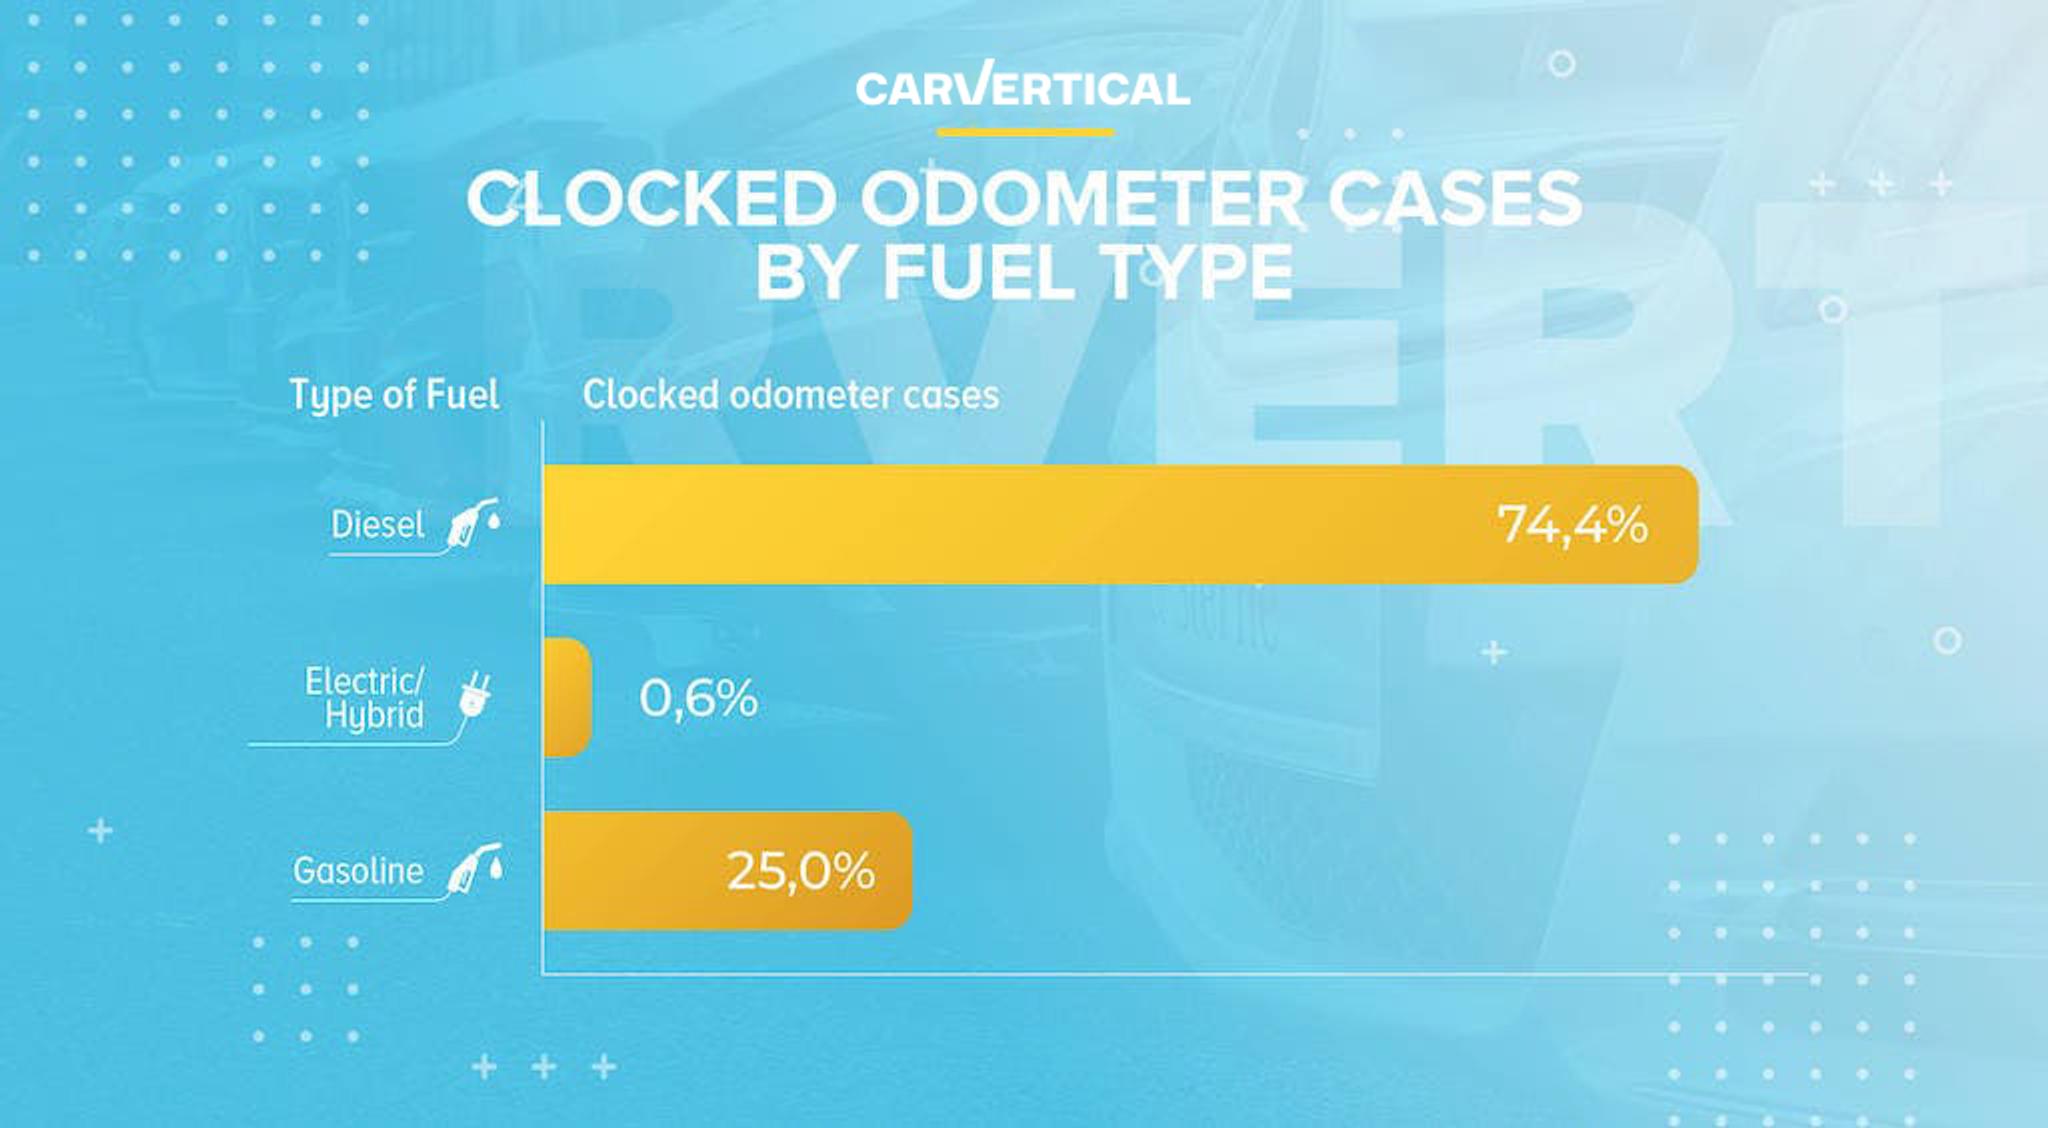 Clocked odometer cases by fuel type